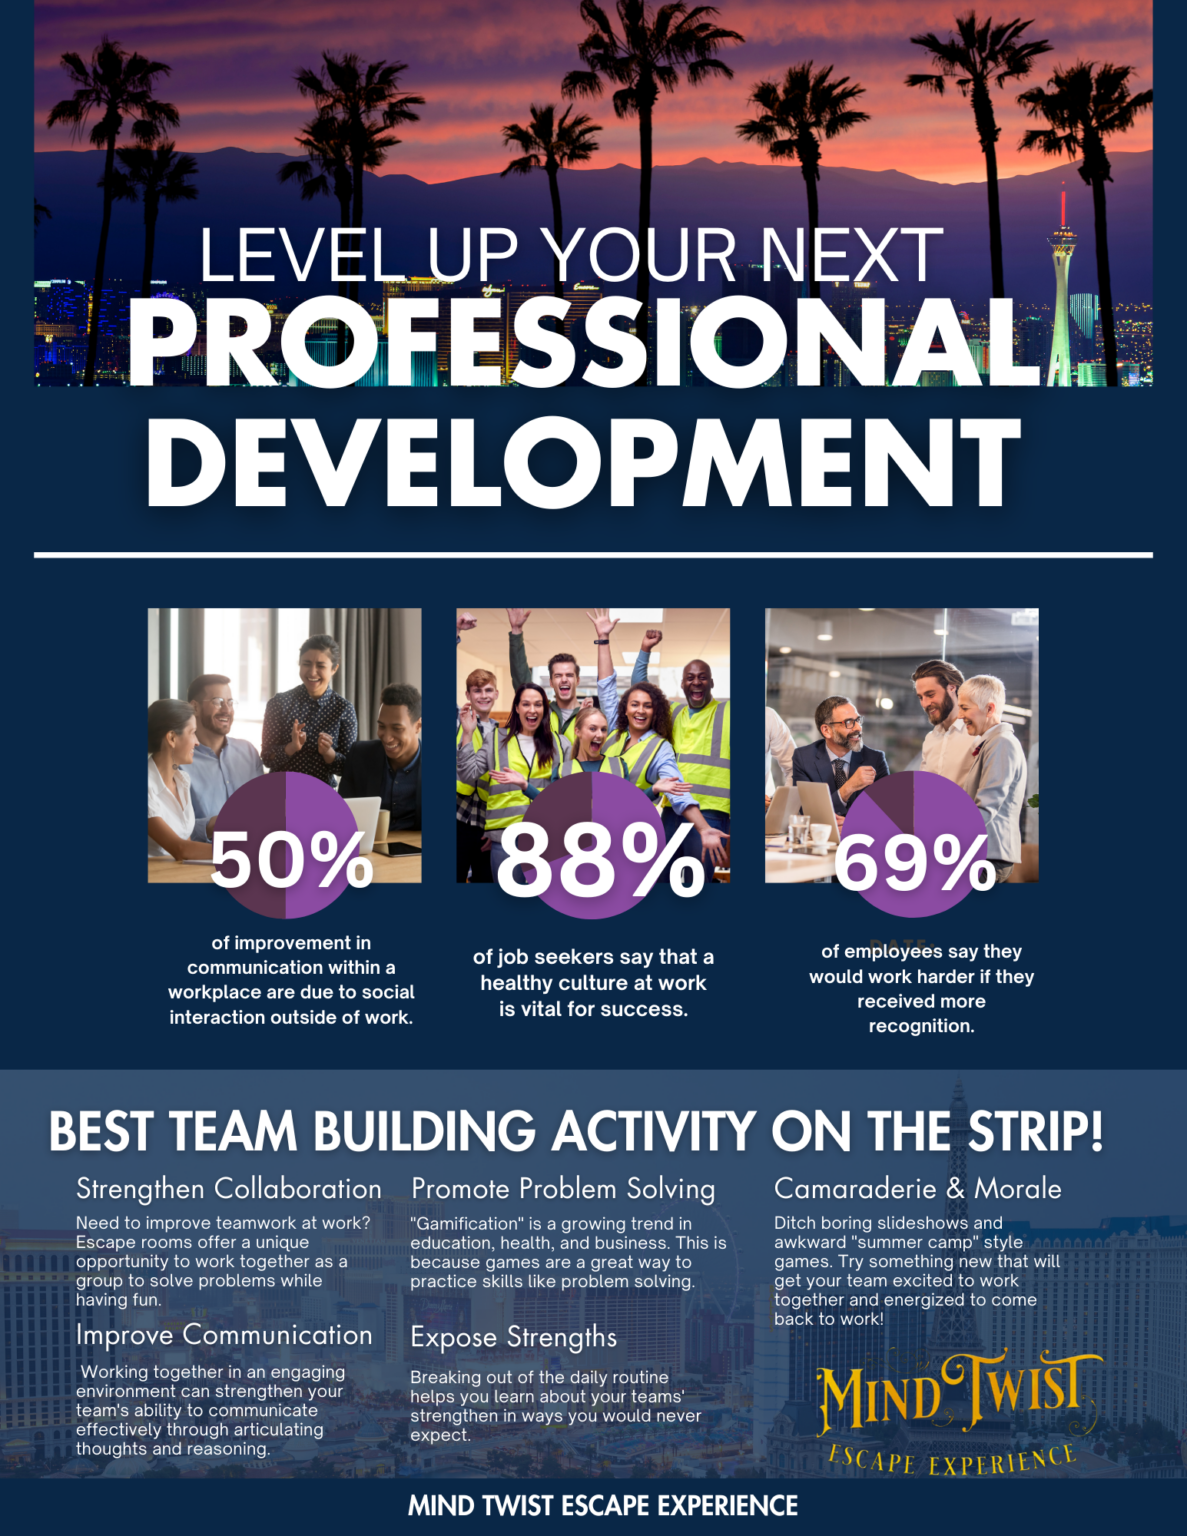 Team Building is essential for professional development and here is why in a great infographic